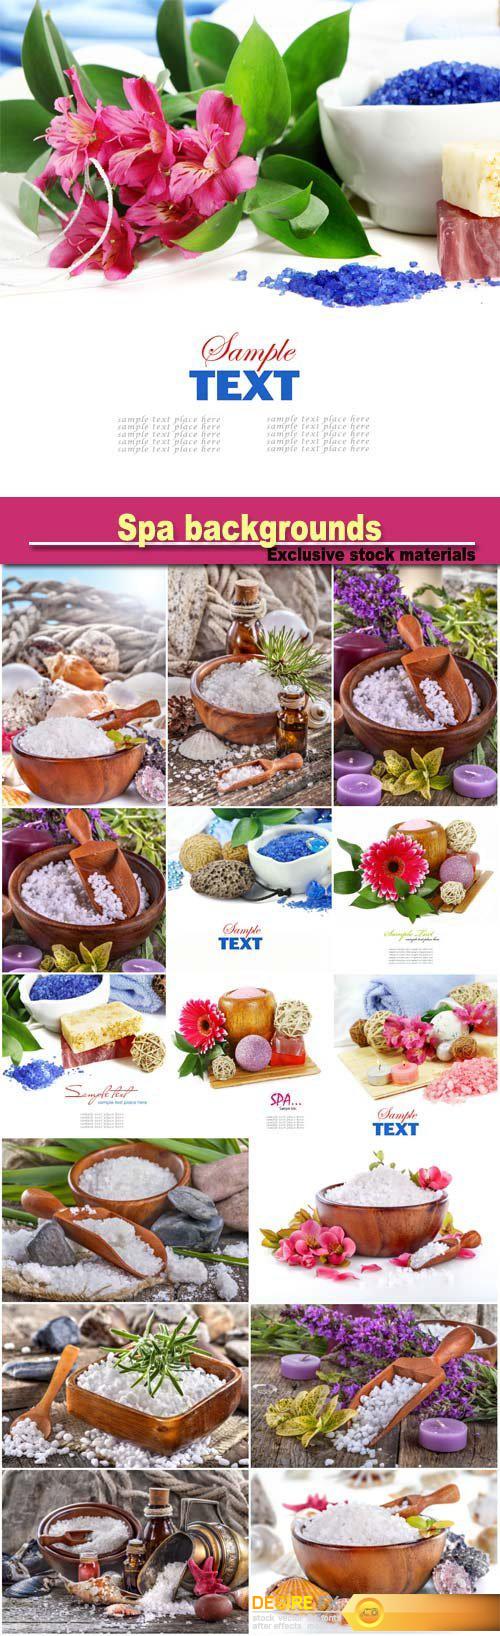 Spa backgrounds, salt bath in wooden spoon with flowers and  leaves in background